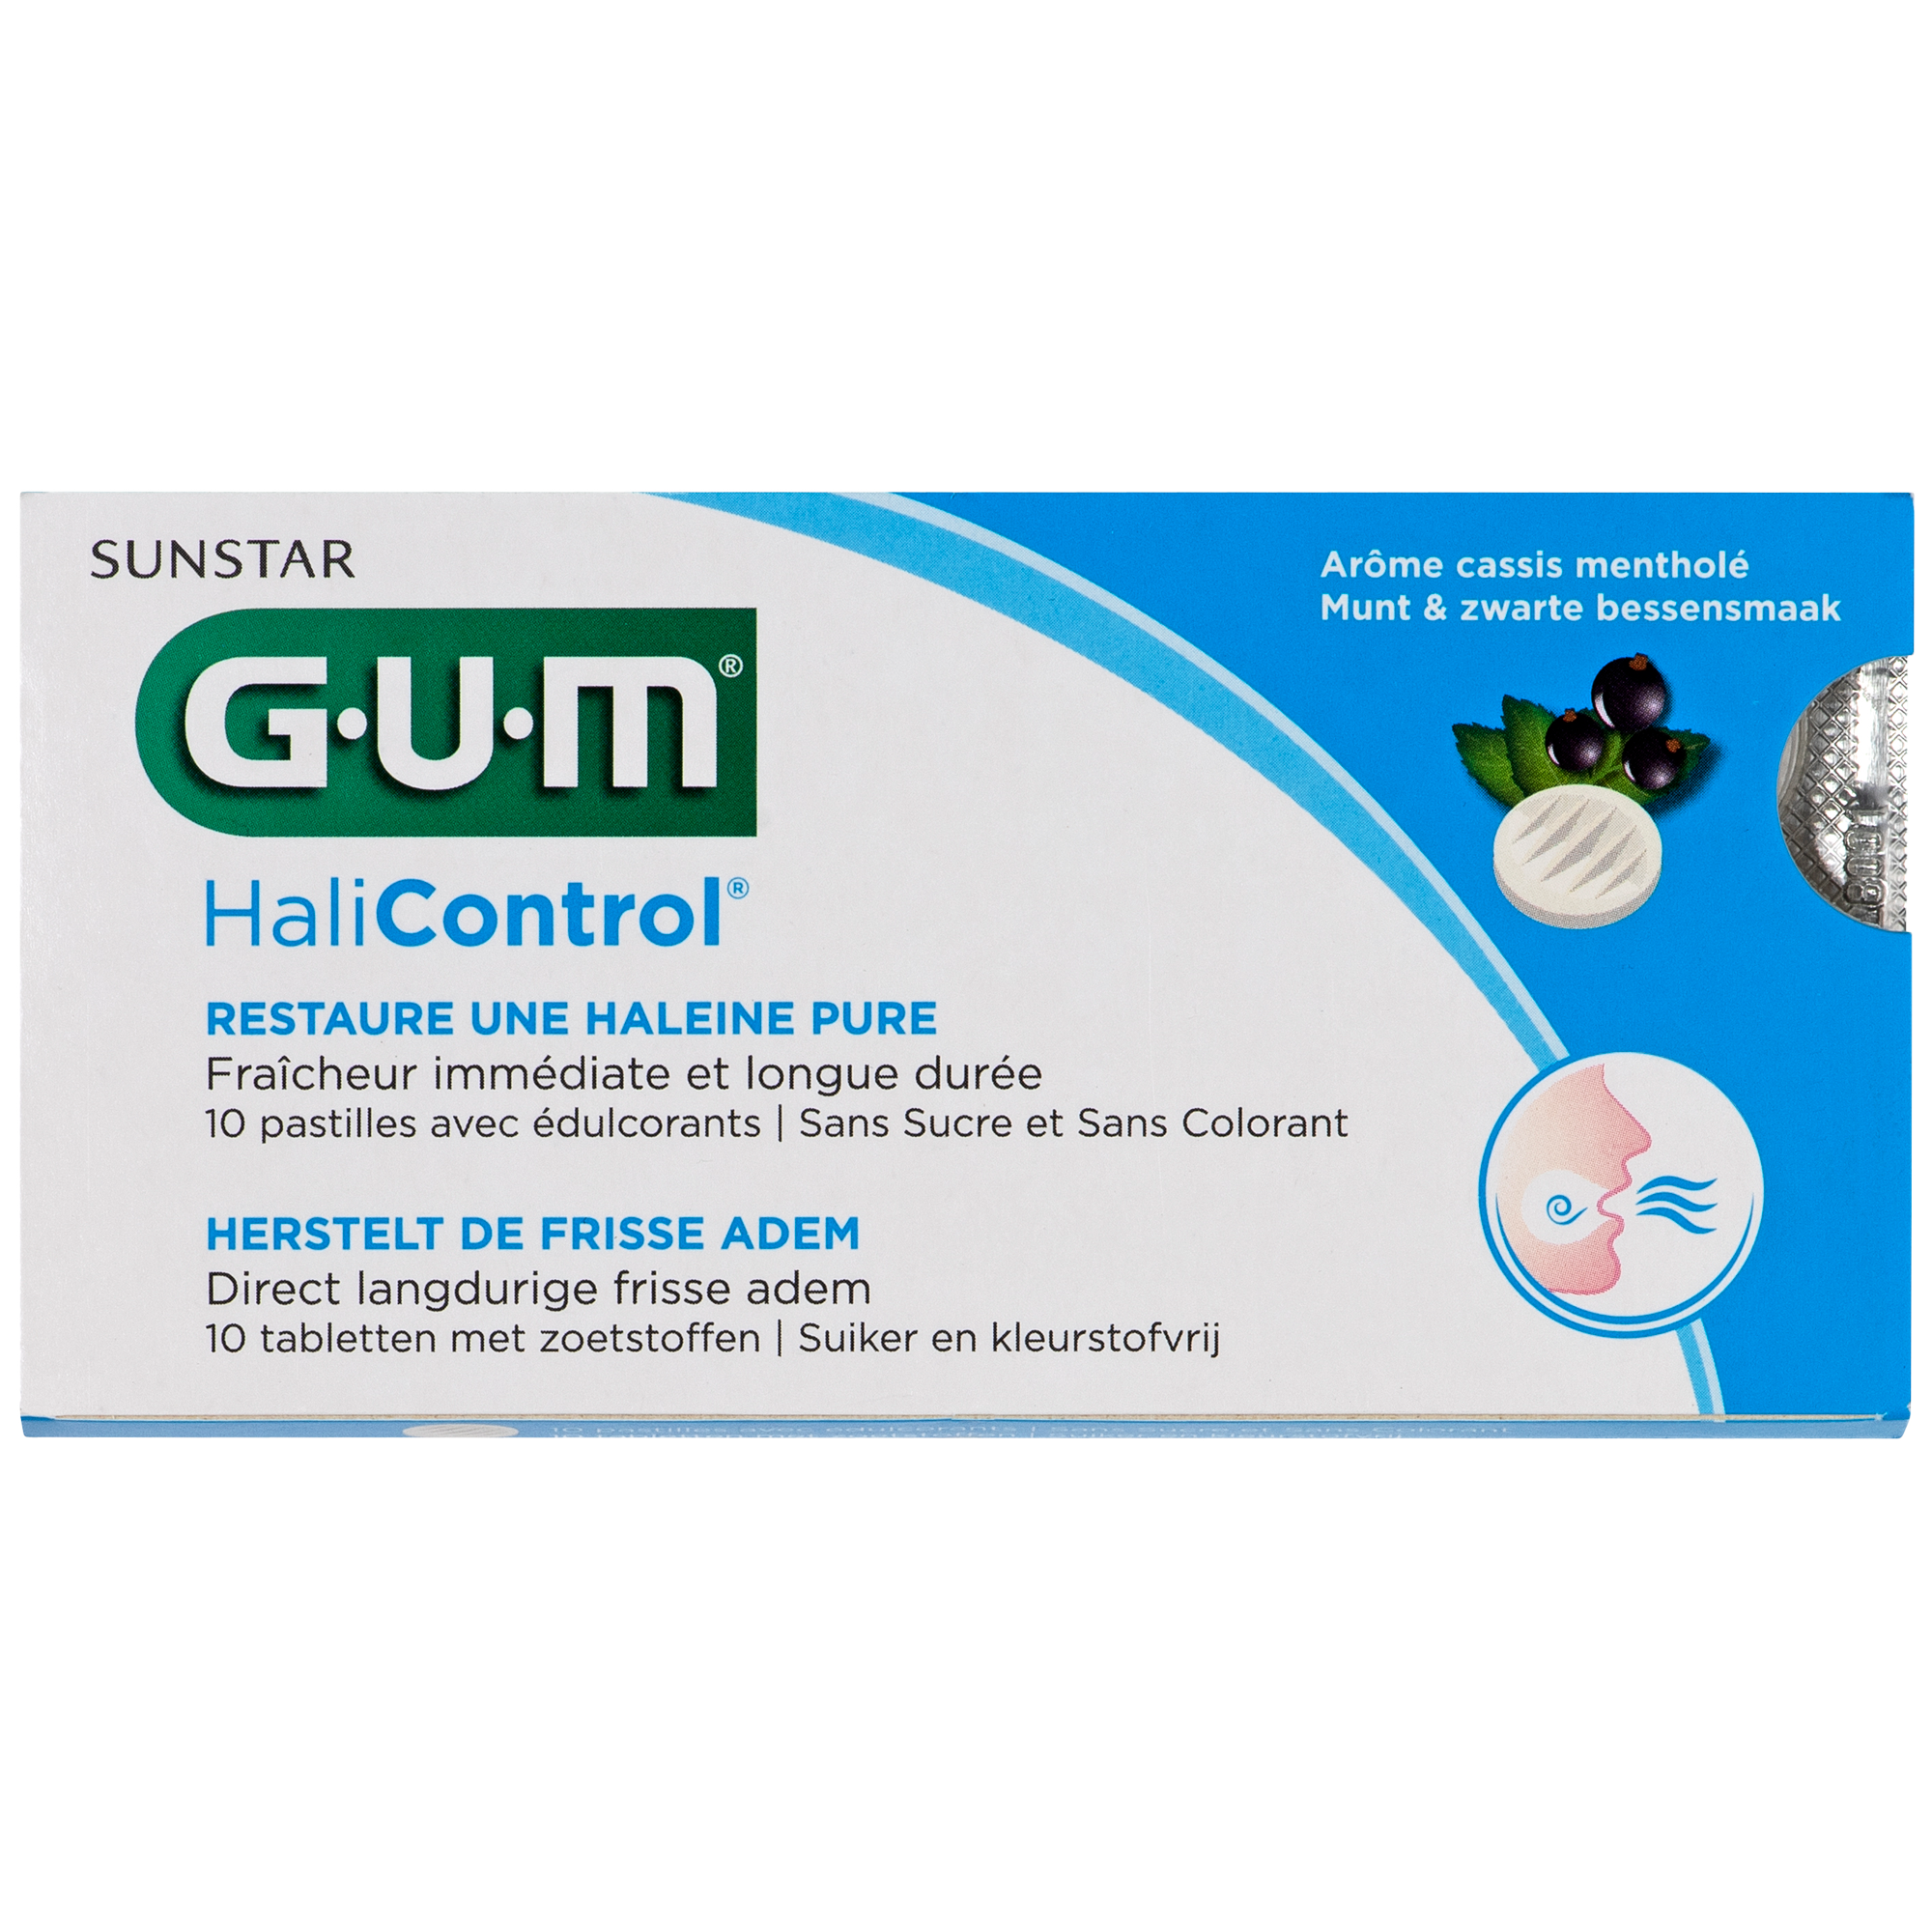 P3060-FR-NL-GUM-Halicontrol-Tablets-10cts-Sleeve-Angle.png